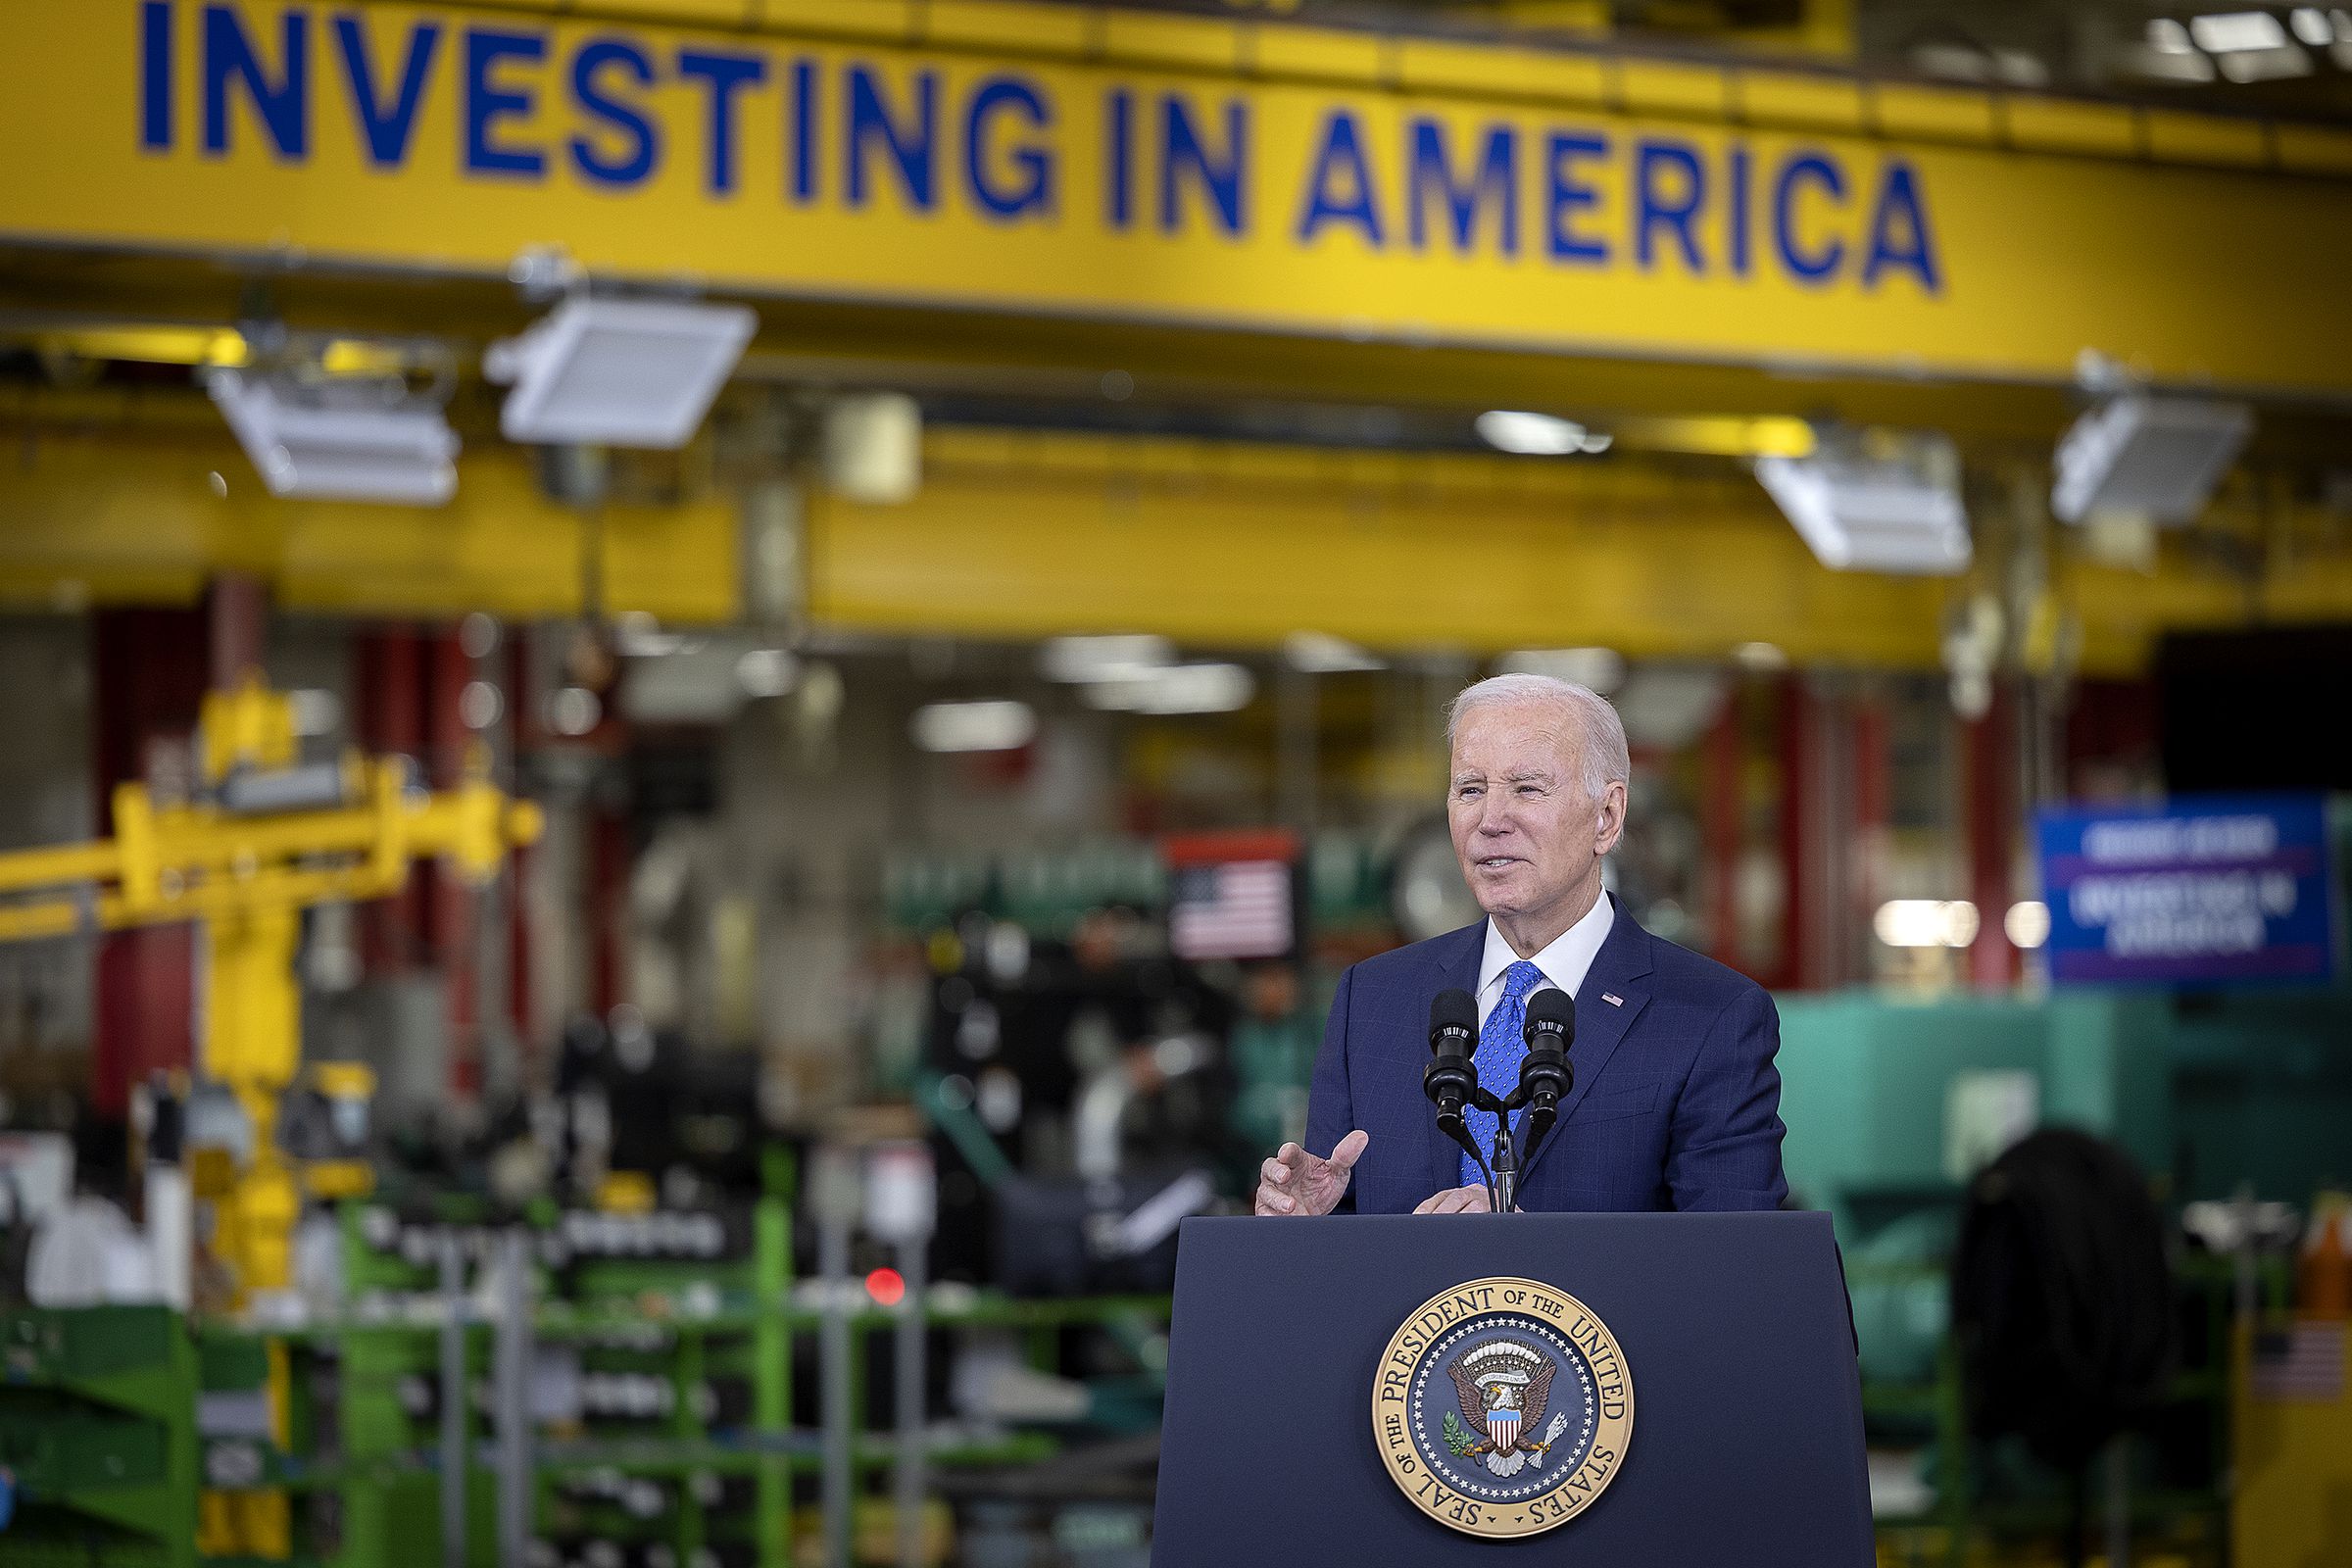 President Joe Biden speaks at a podium in an industrial building with signage that says “investing in America” behind him.